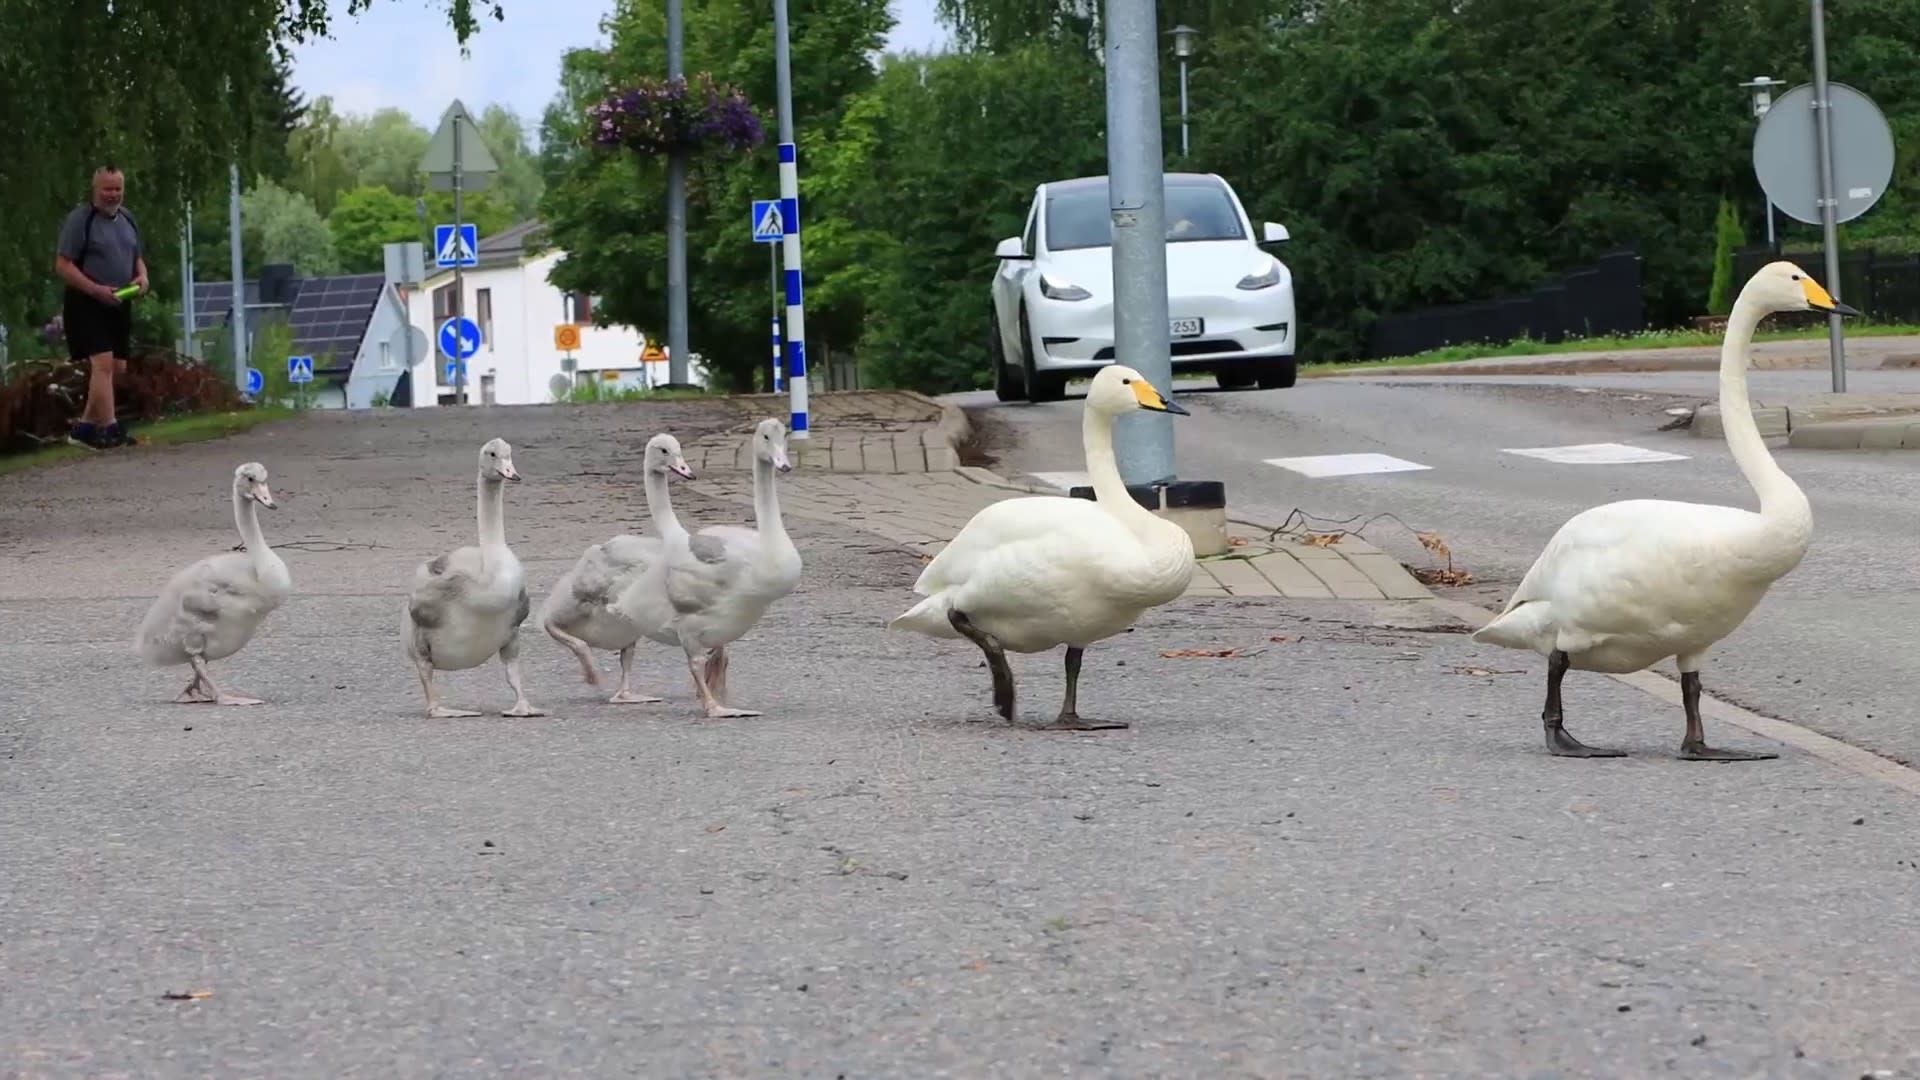 Watch: Swan family become social media hit for obeying traffic rules